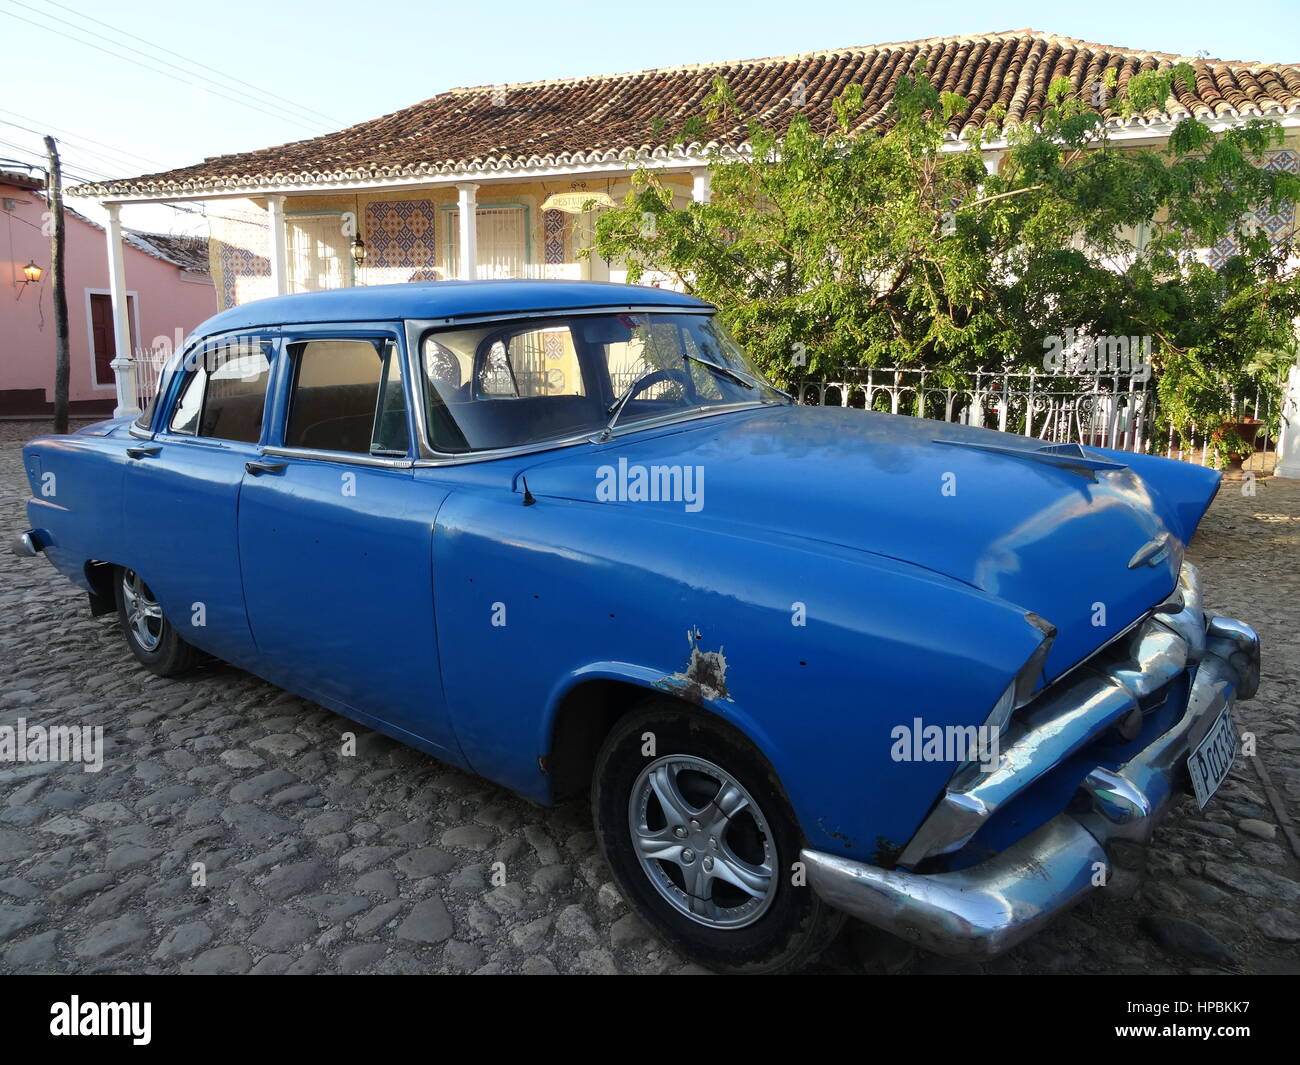 Classic american blue car parked on a cobbled  street in Trinidad, Cuba with old colonial buildings on the background Stock Photo